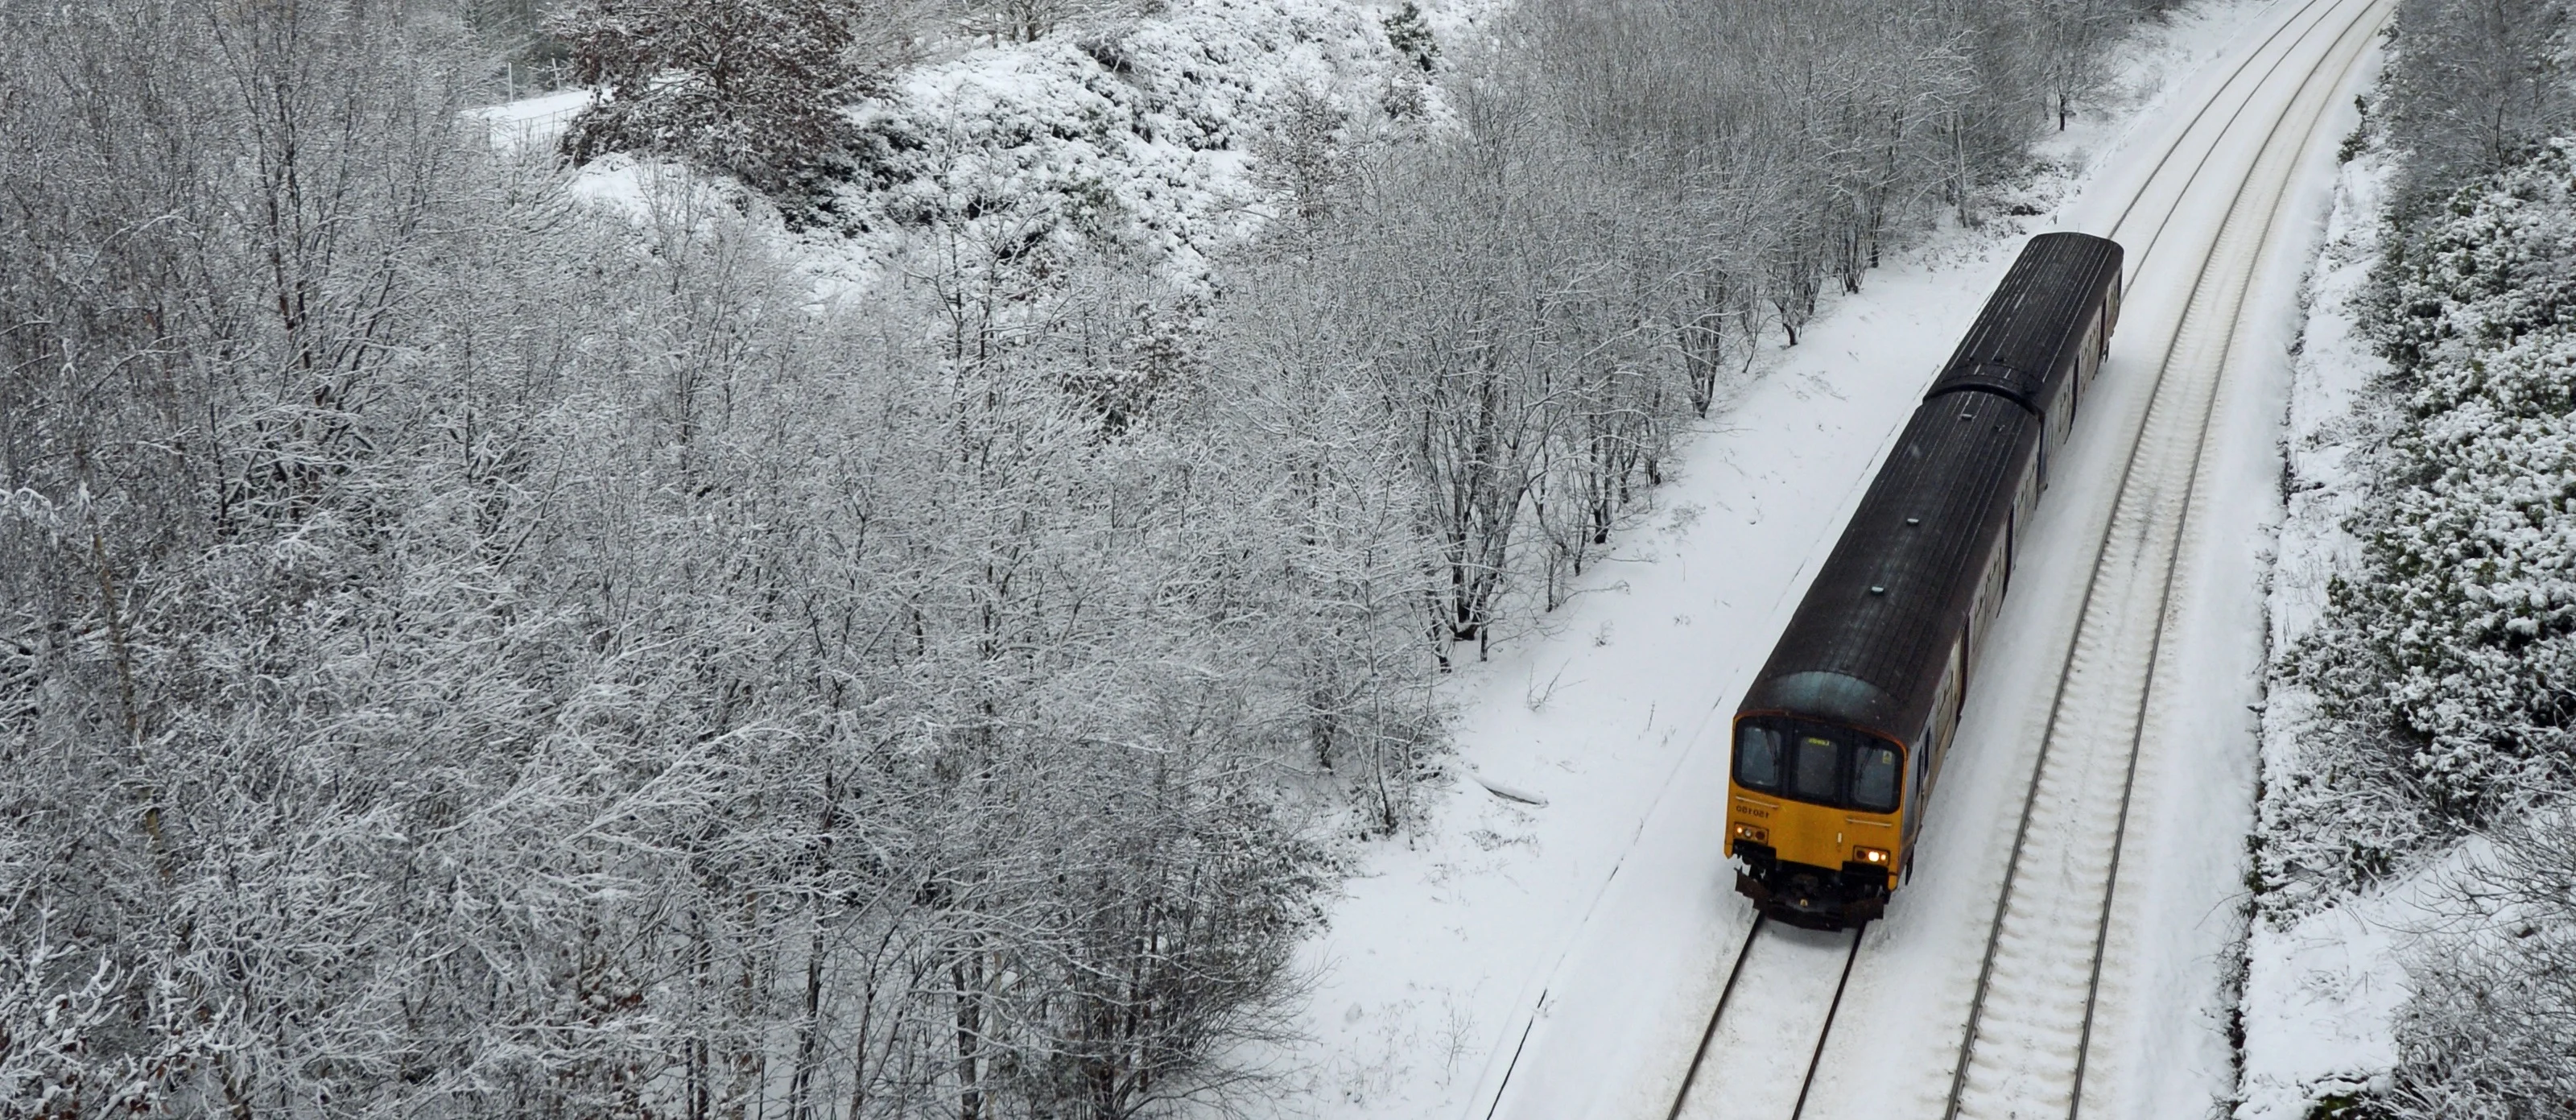 A train moving along a snowy track with snow-covered trees on both sides